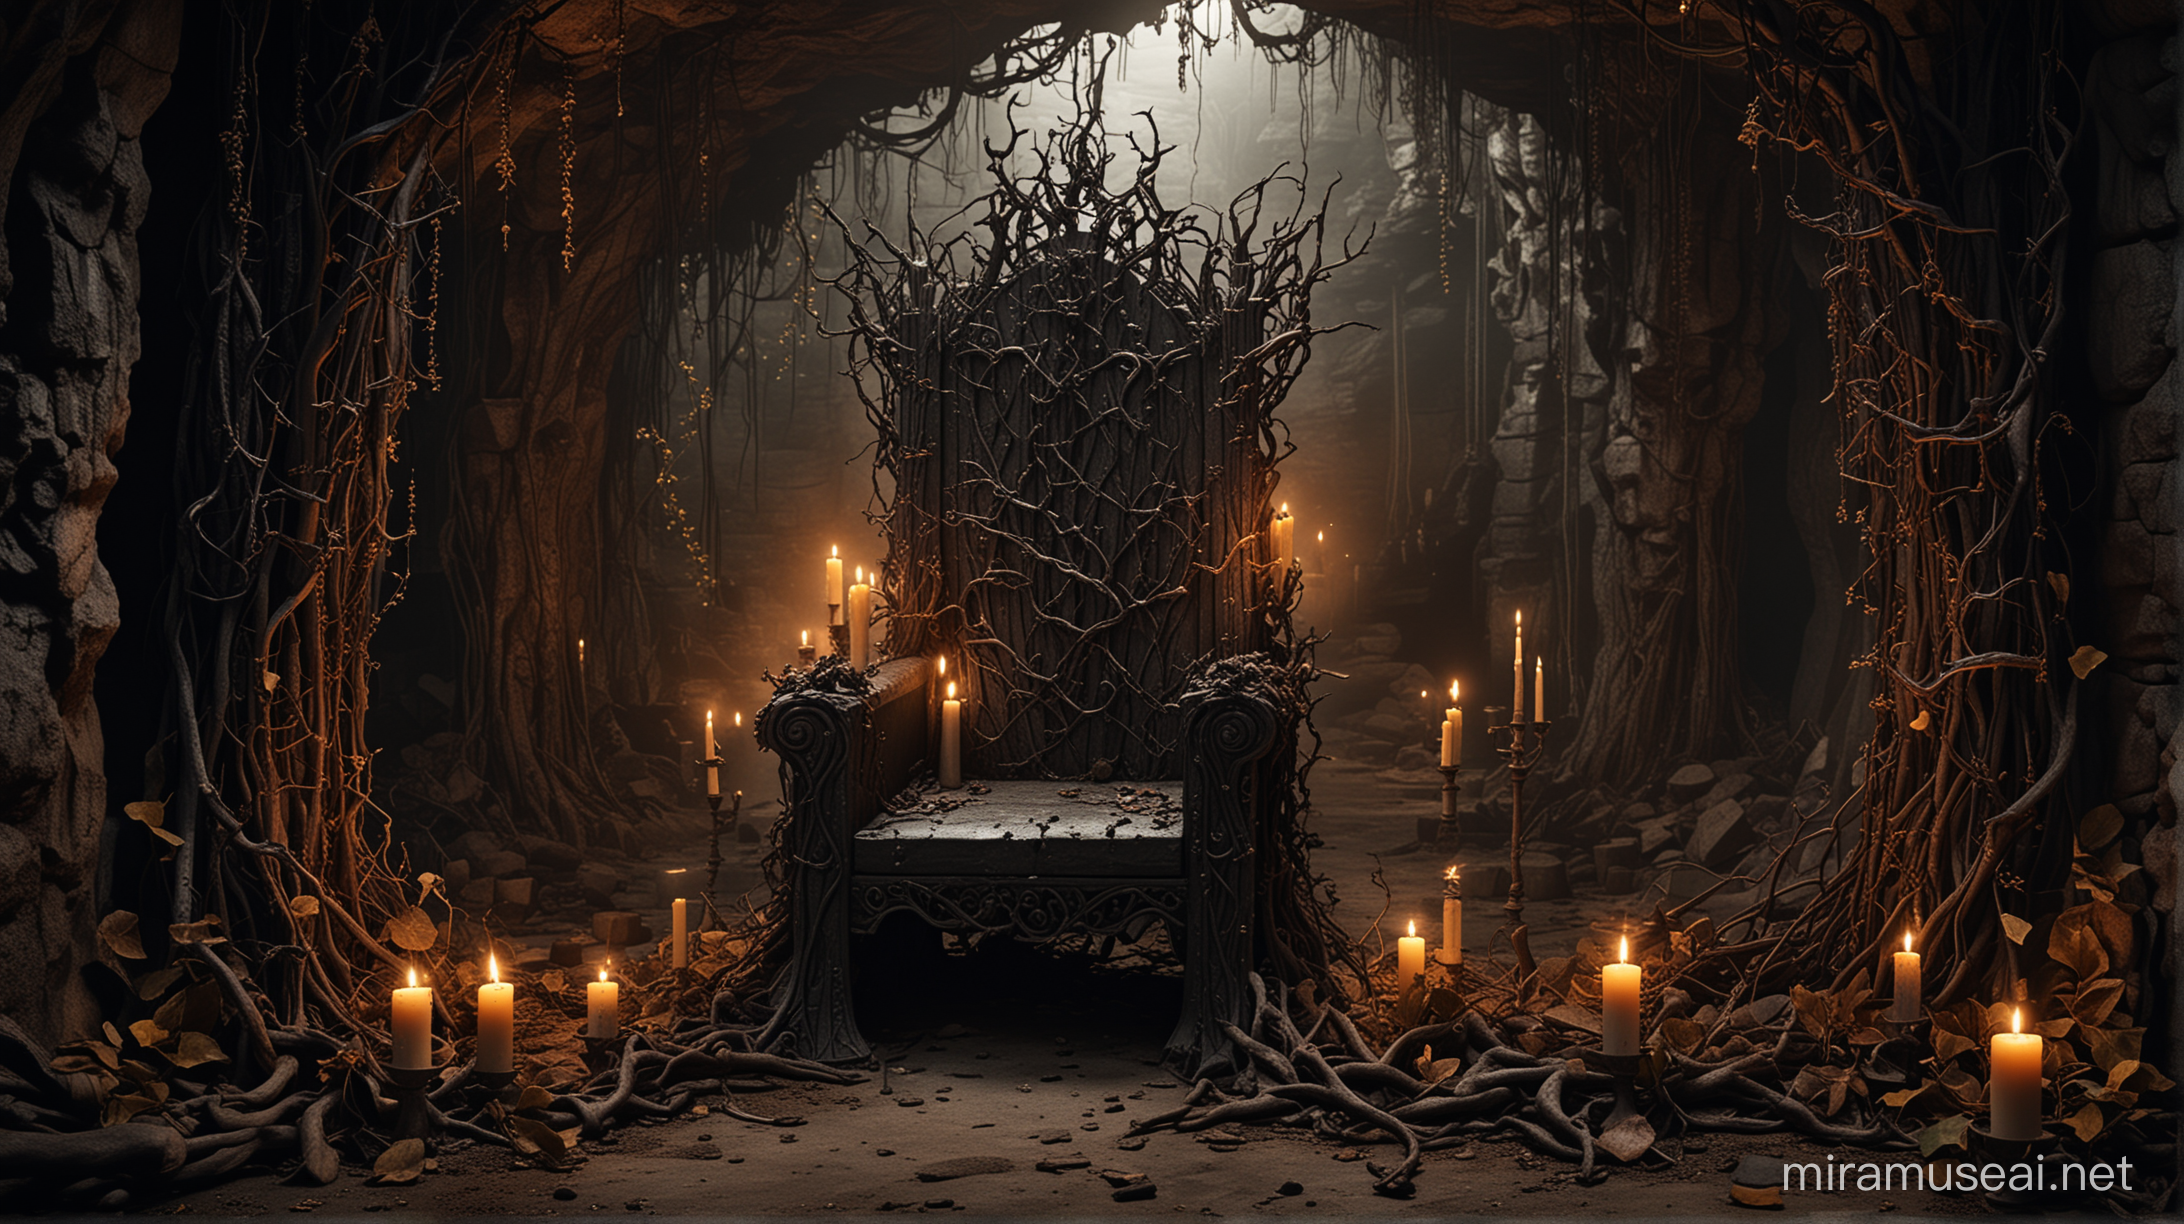 Dark enchanted decay throne in an decay cave with vines and candles